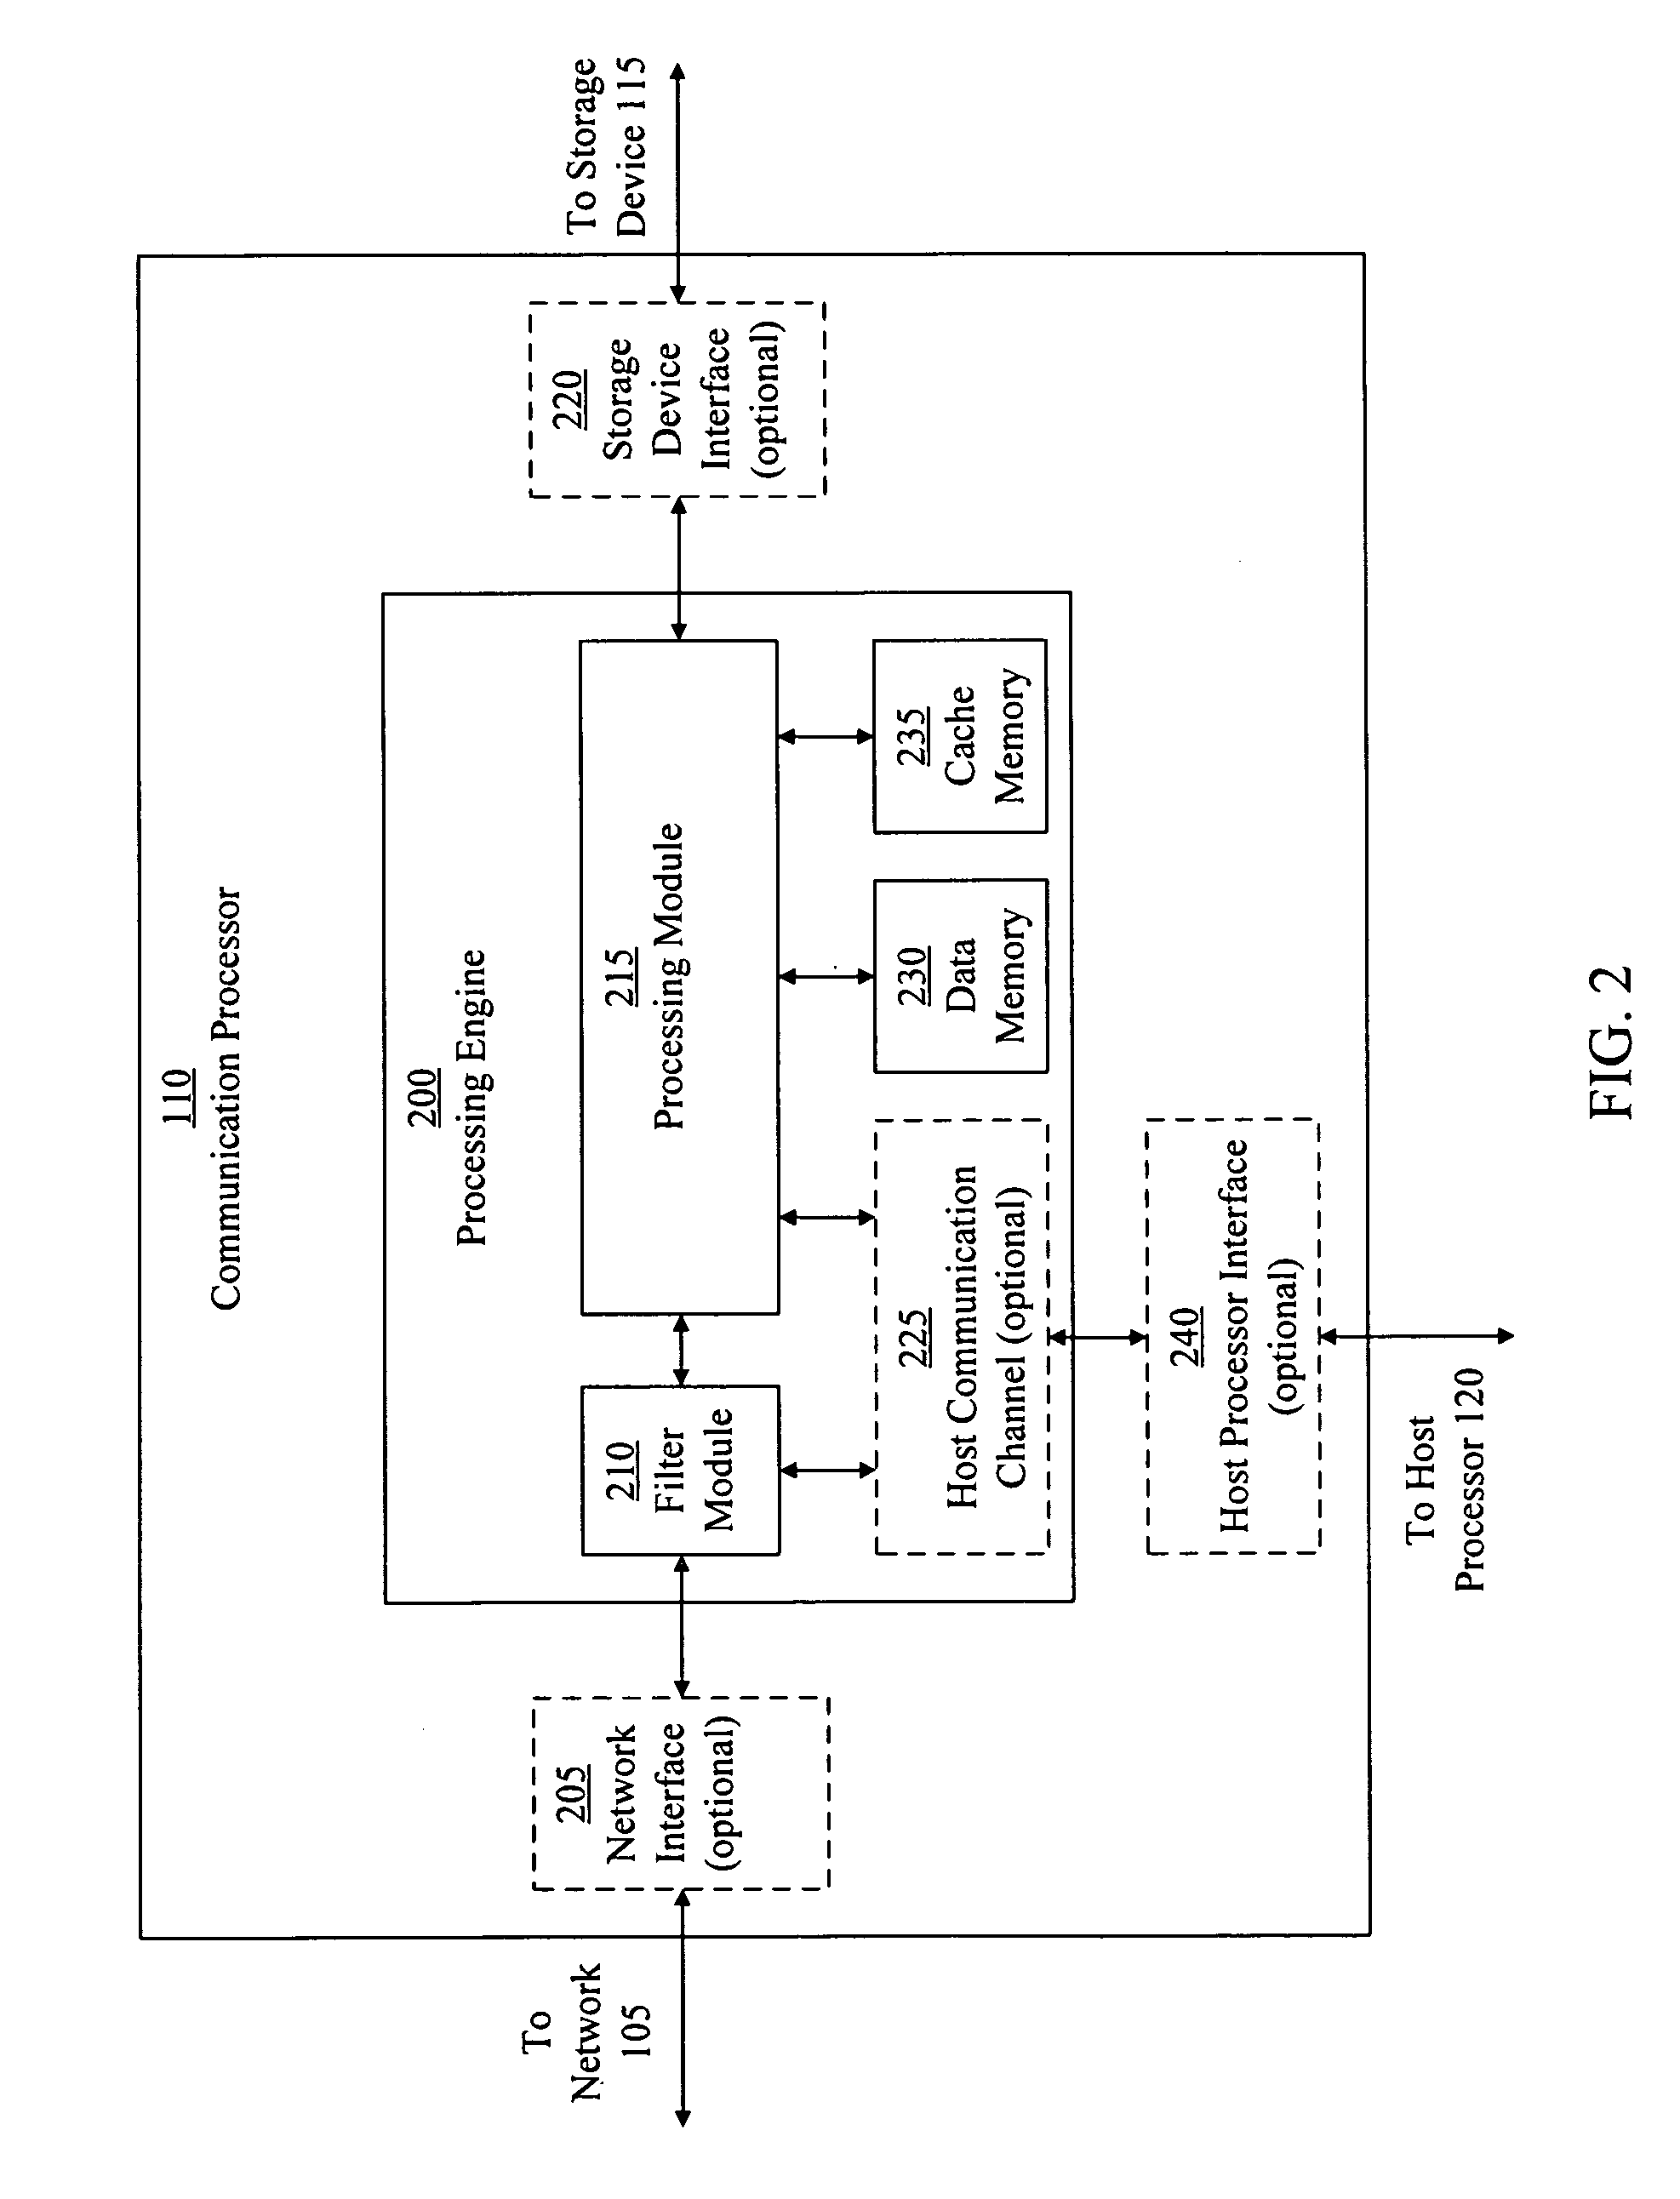 Direct file transfer system and method for a computer network